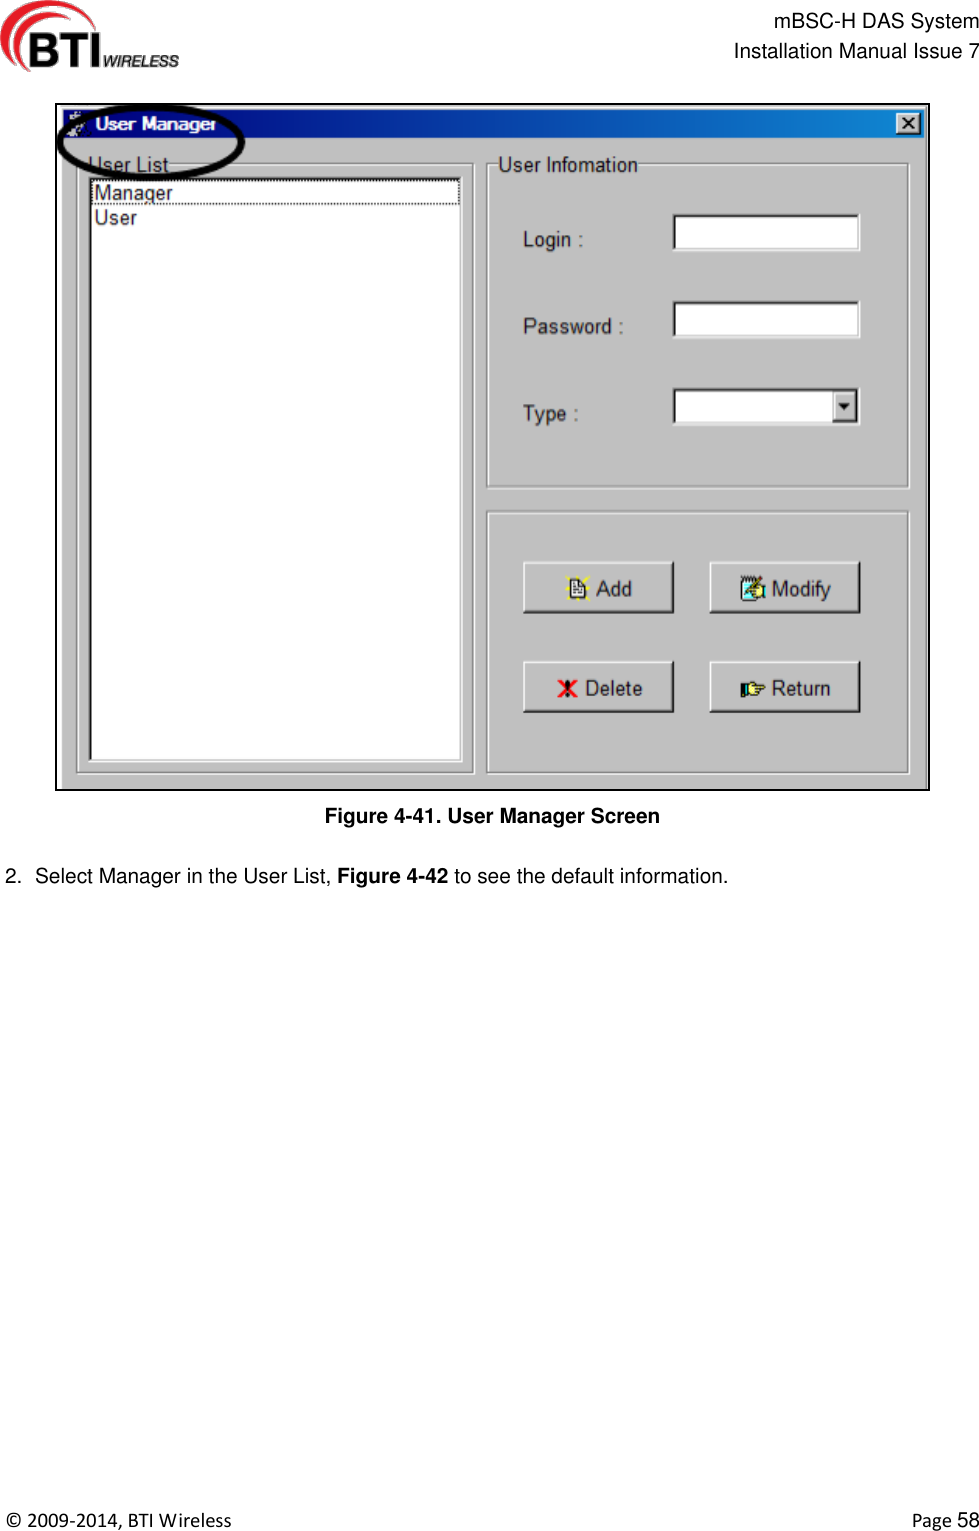                                                   mBSC-H DAS System   Installation Manual Issue 7  ©  2009-2014, BTI Wireless    Page 58  Figure 4-41. User Manager Screen  2.  Select Manager in the User List, Figure 4-42 to see the default information. 